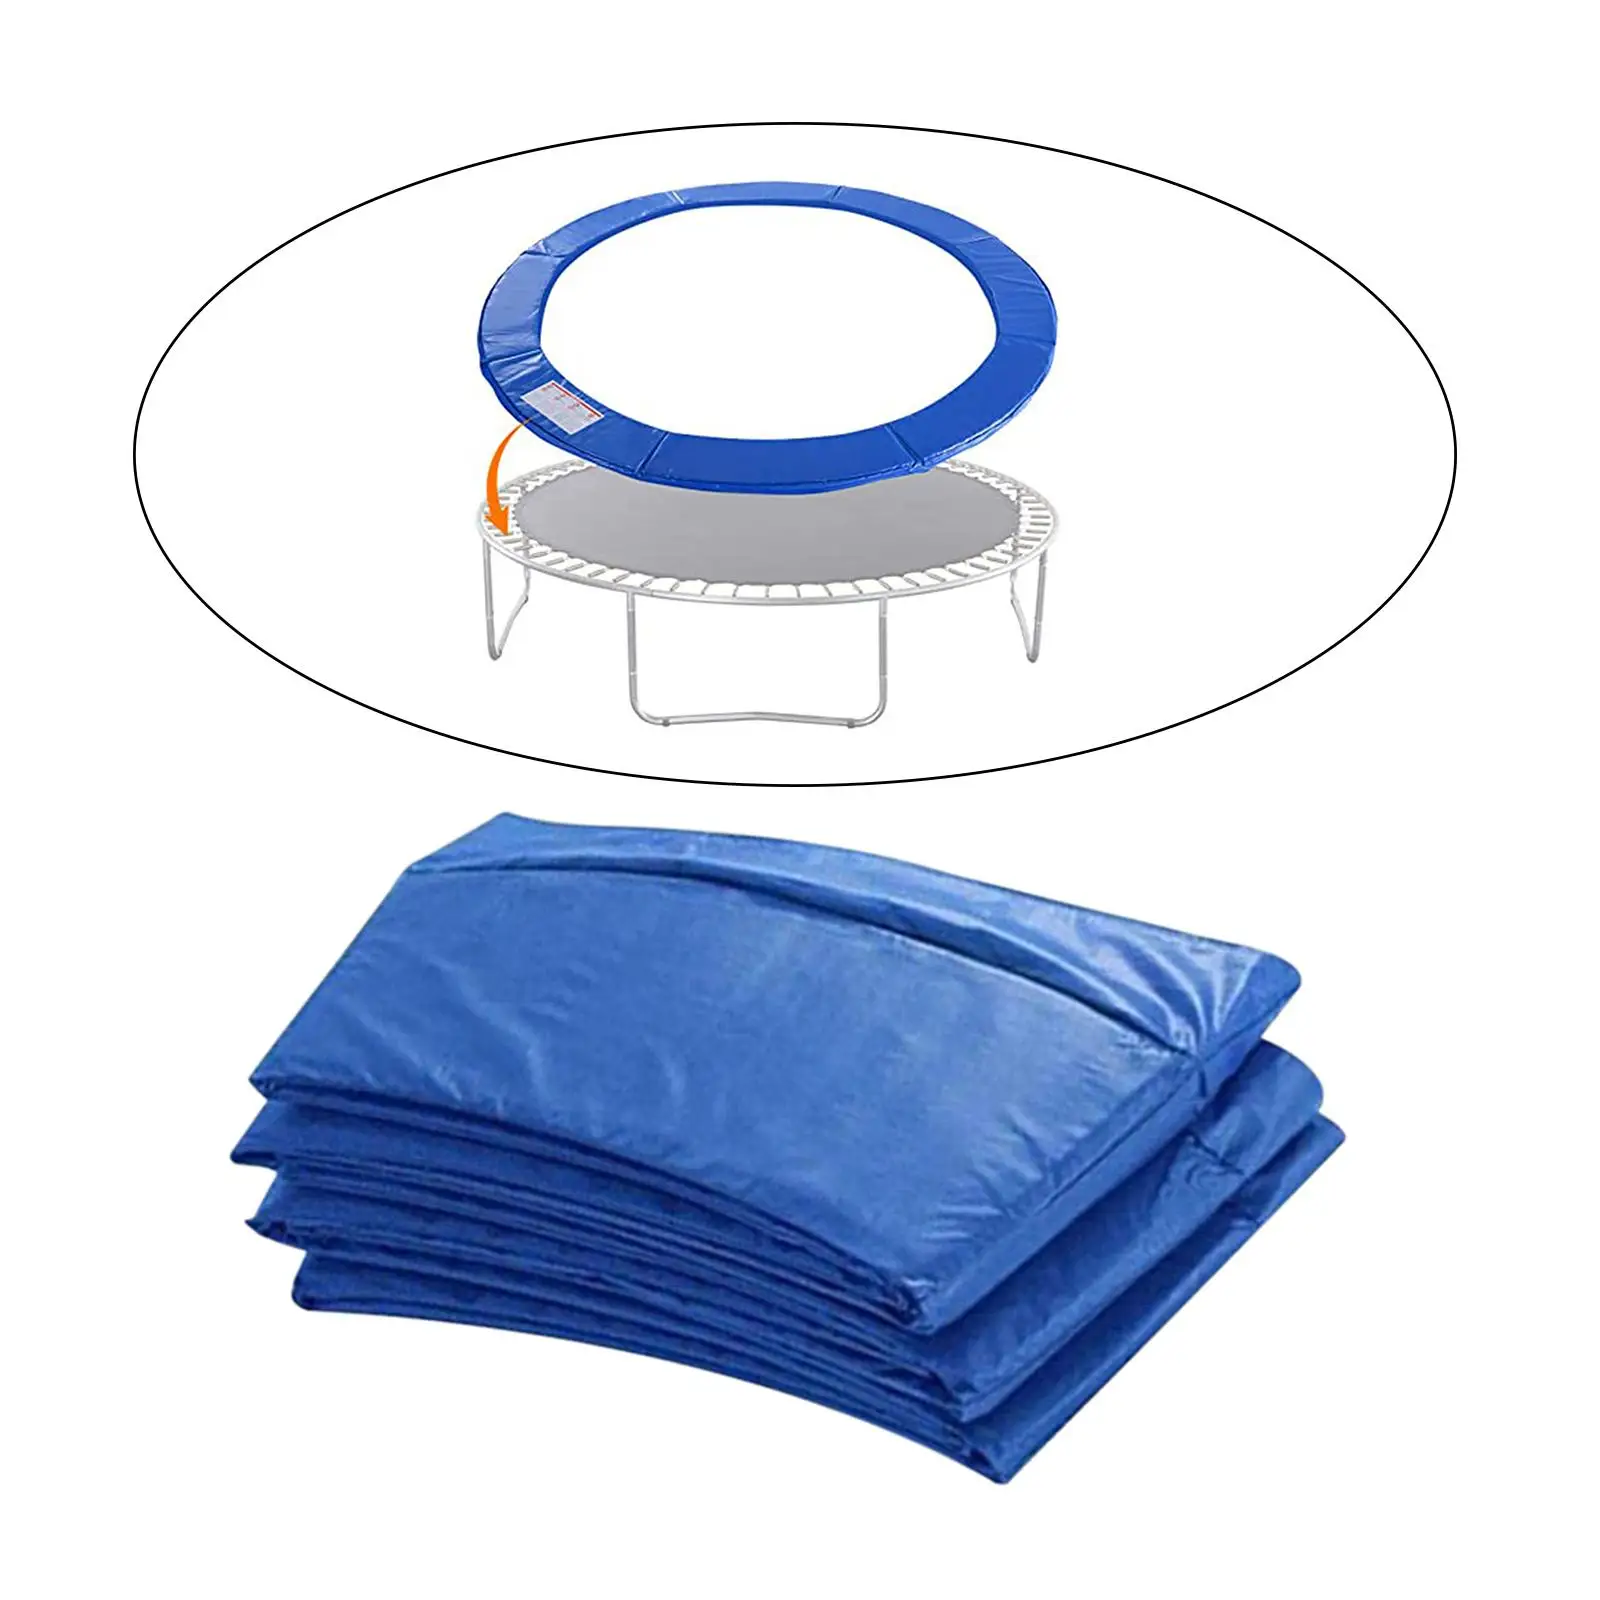 Trampoline Safety Pad Mat Replace Durable Fits Round Trampoline Frame 12ft Waterproof Tear Resistant No Hole for Pole Side Guard